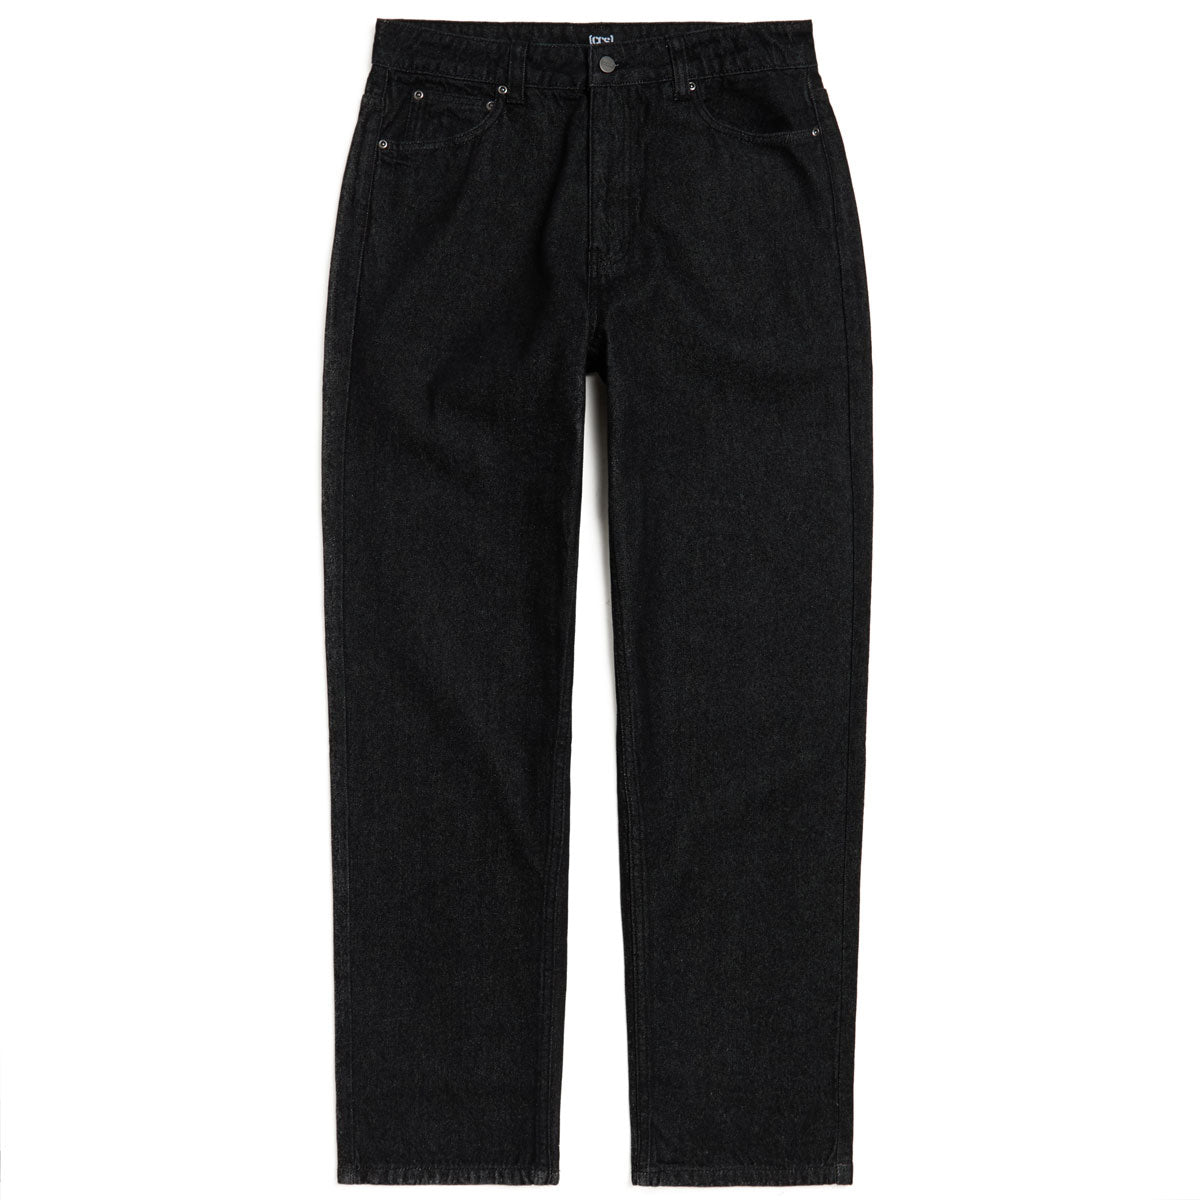 CCS Original Relaxed Taper Jeans - Black image 4